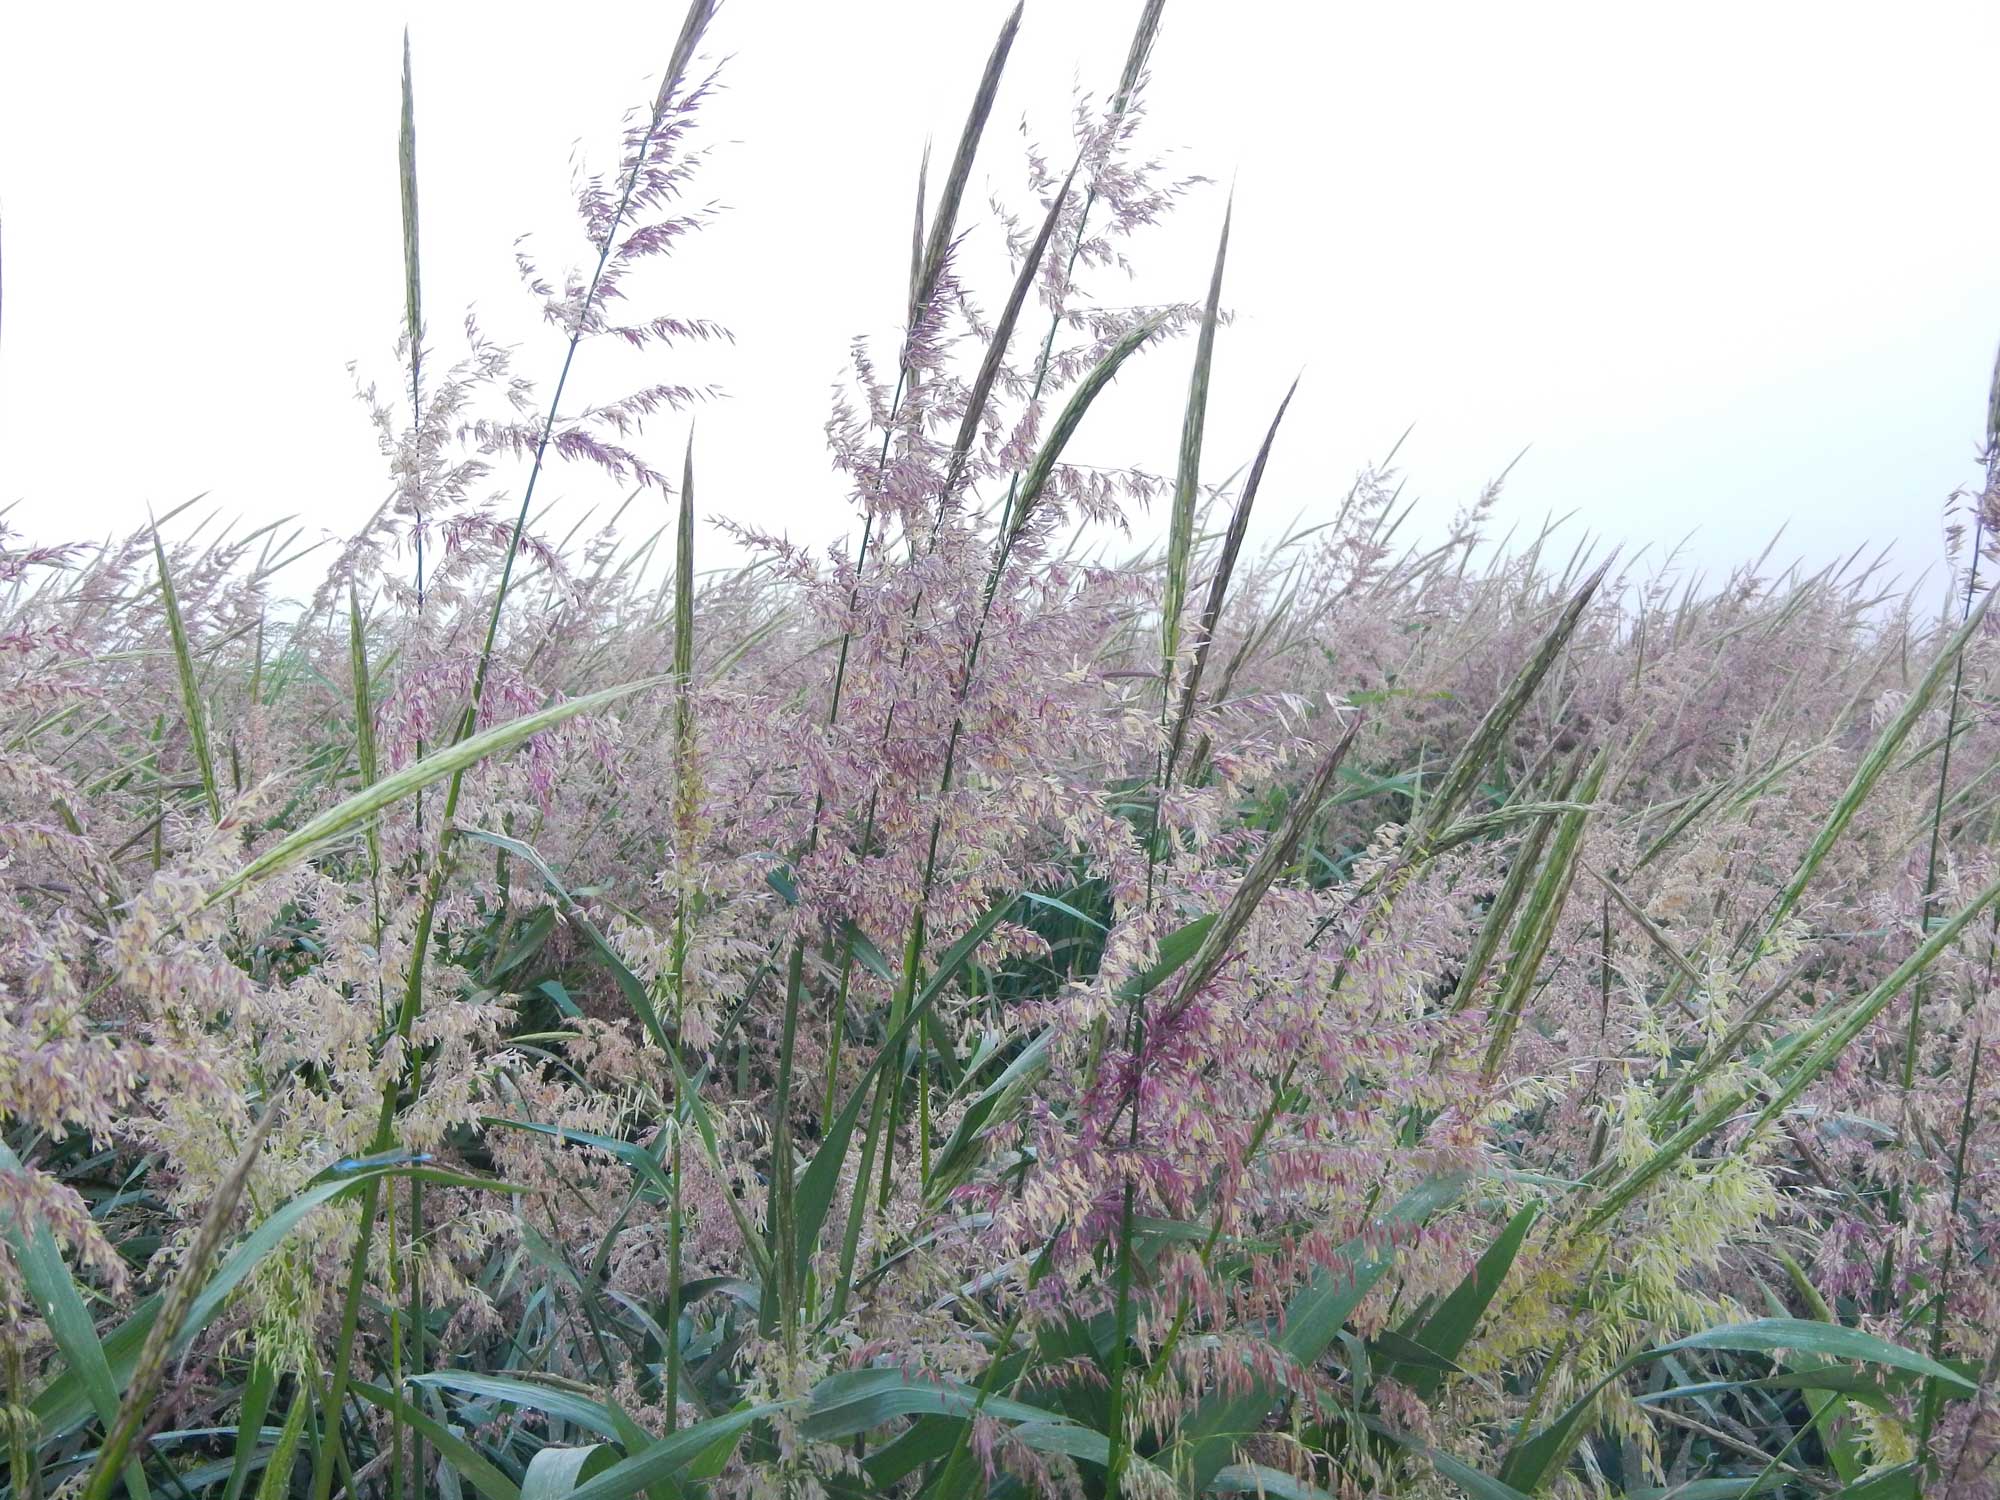 Photograph of wild rice cultivated in a field in California.